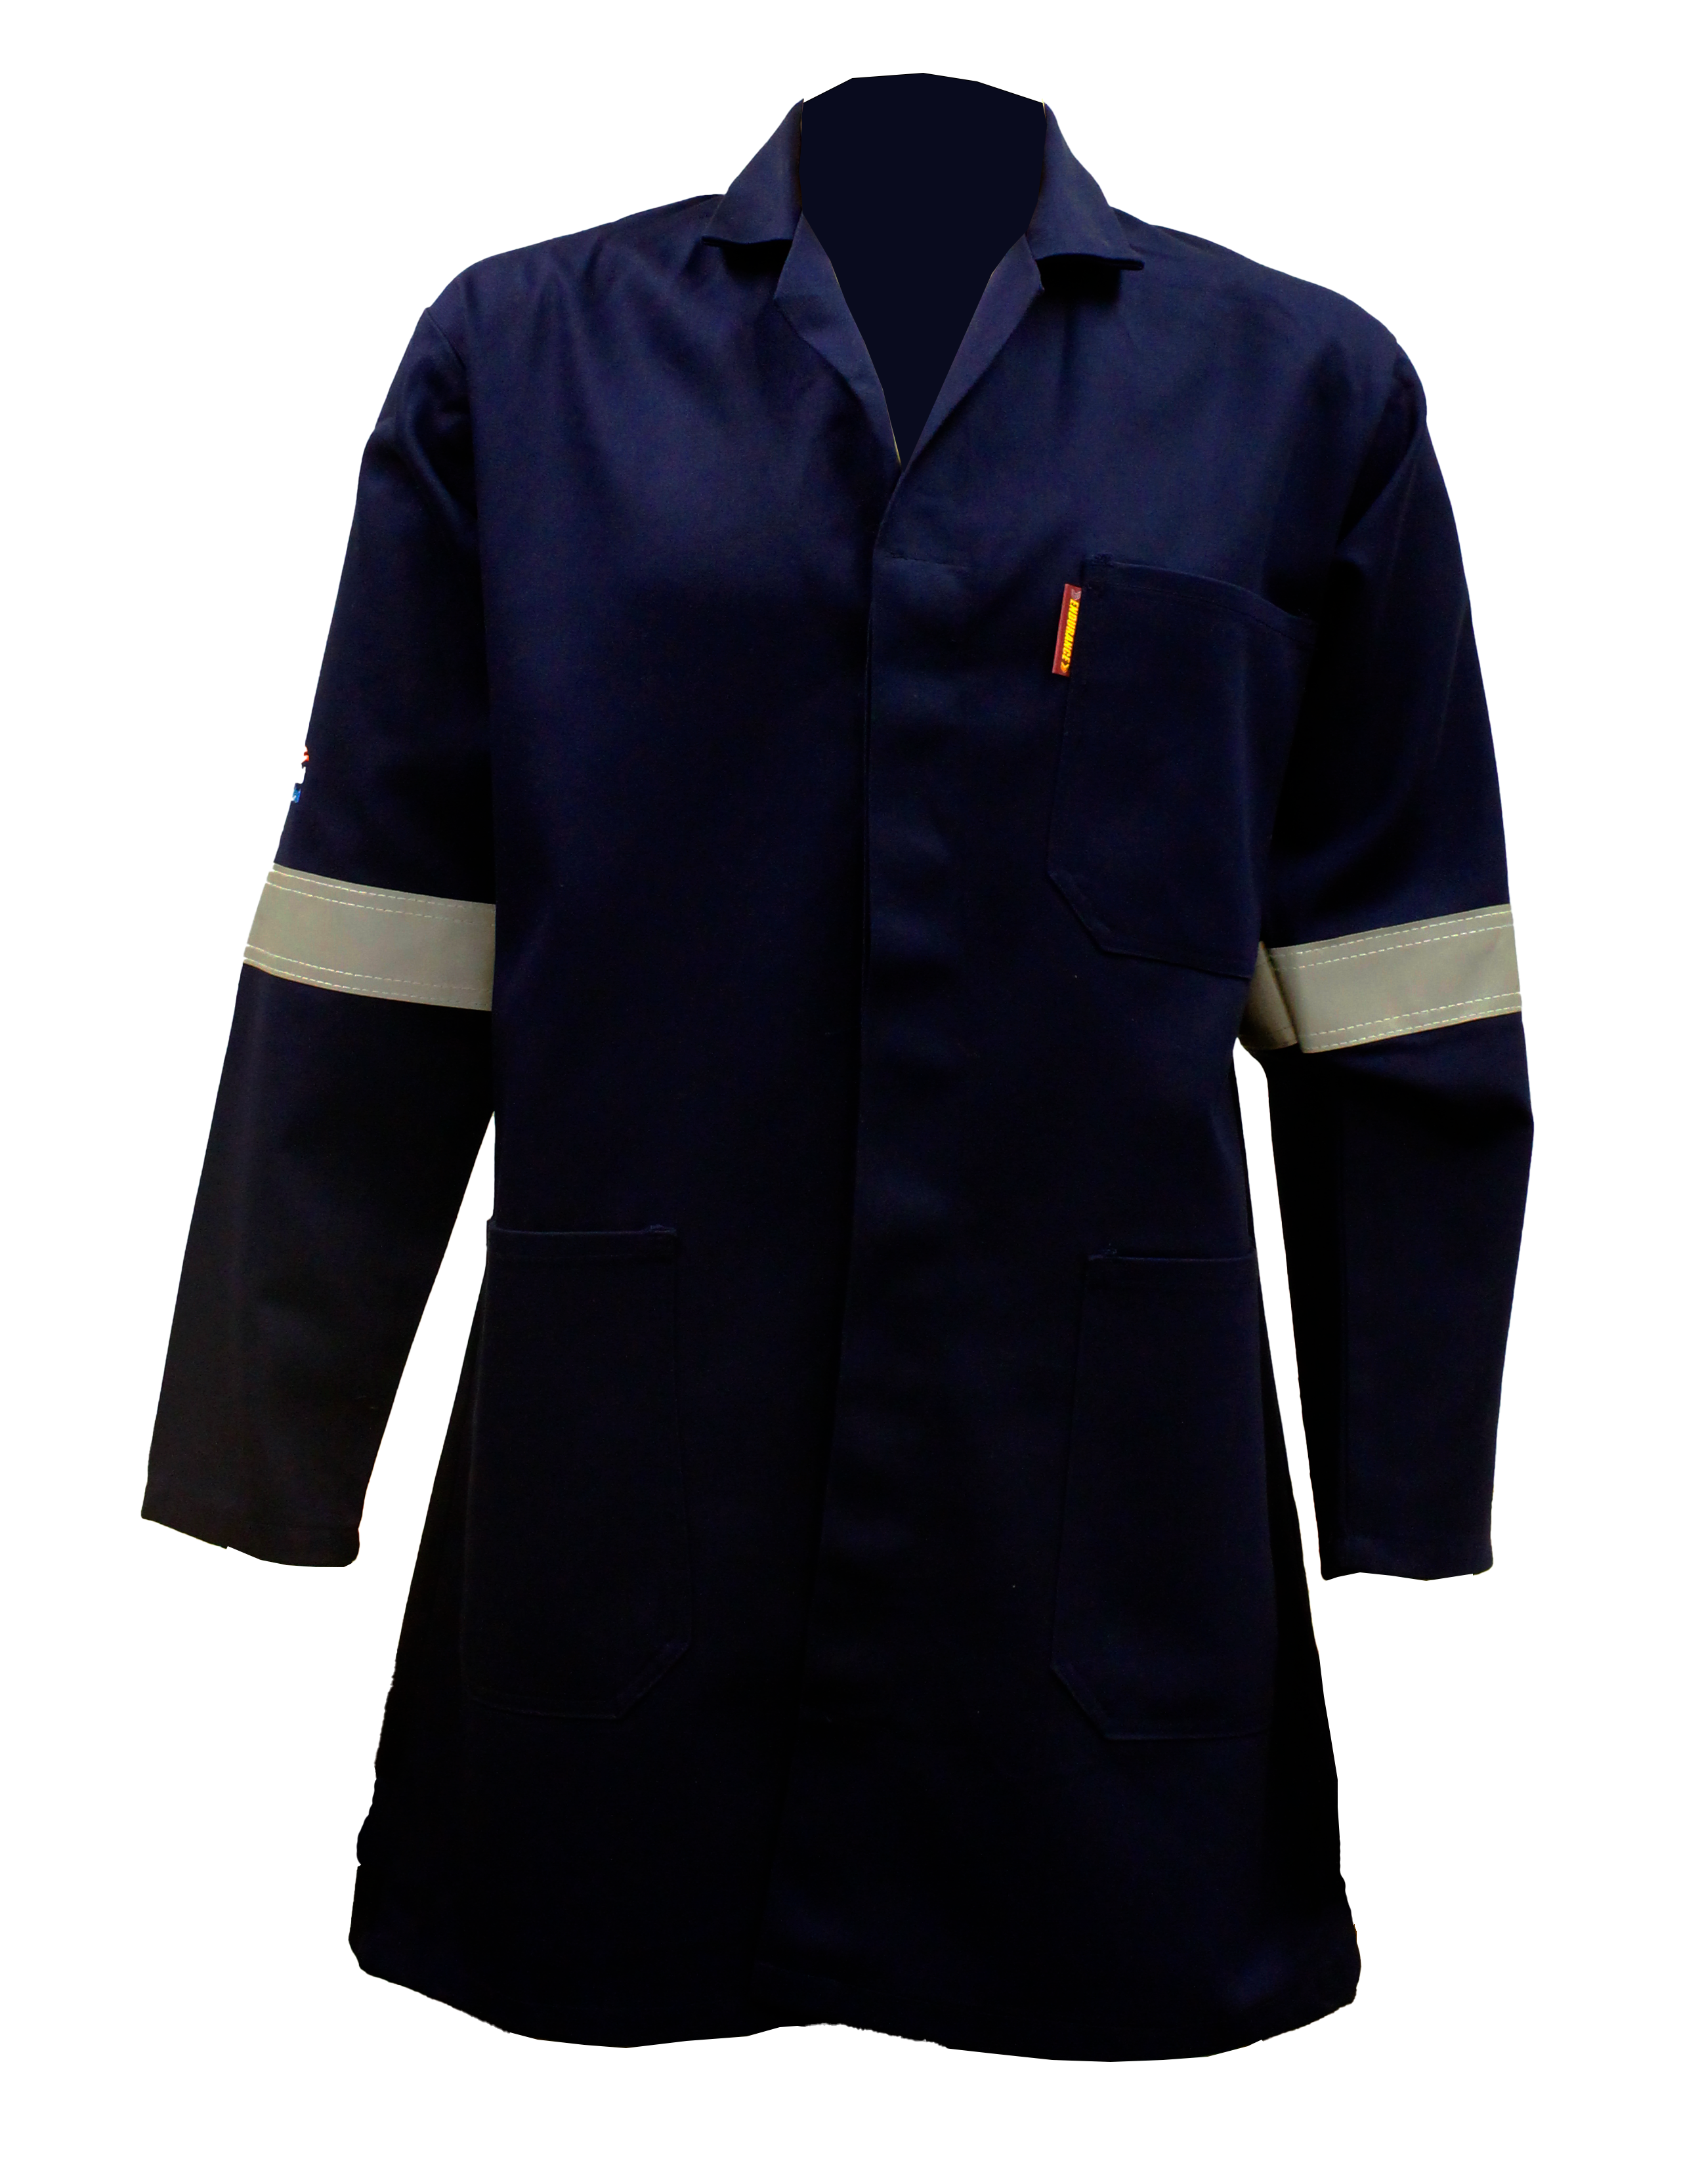 J54 100% Cotton SABS Approved Conti Suit - Endurance Workwear